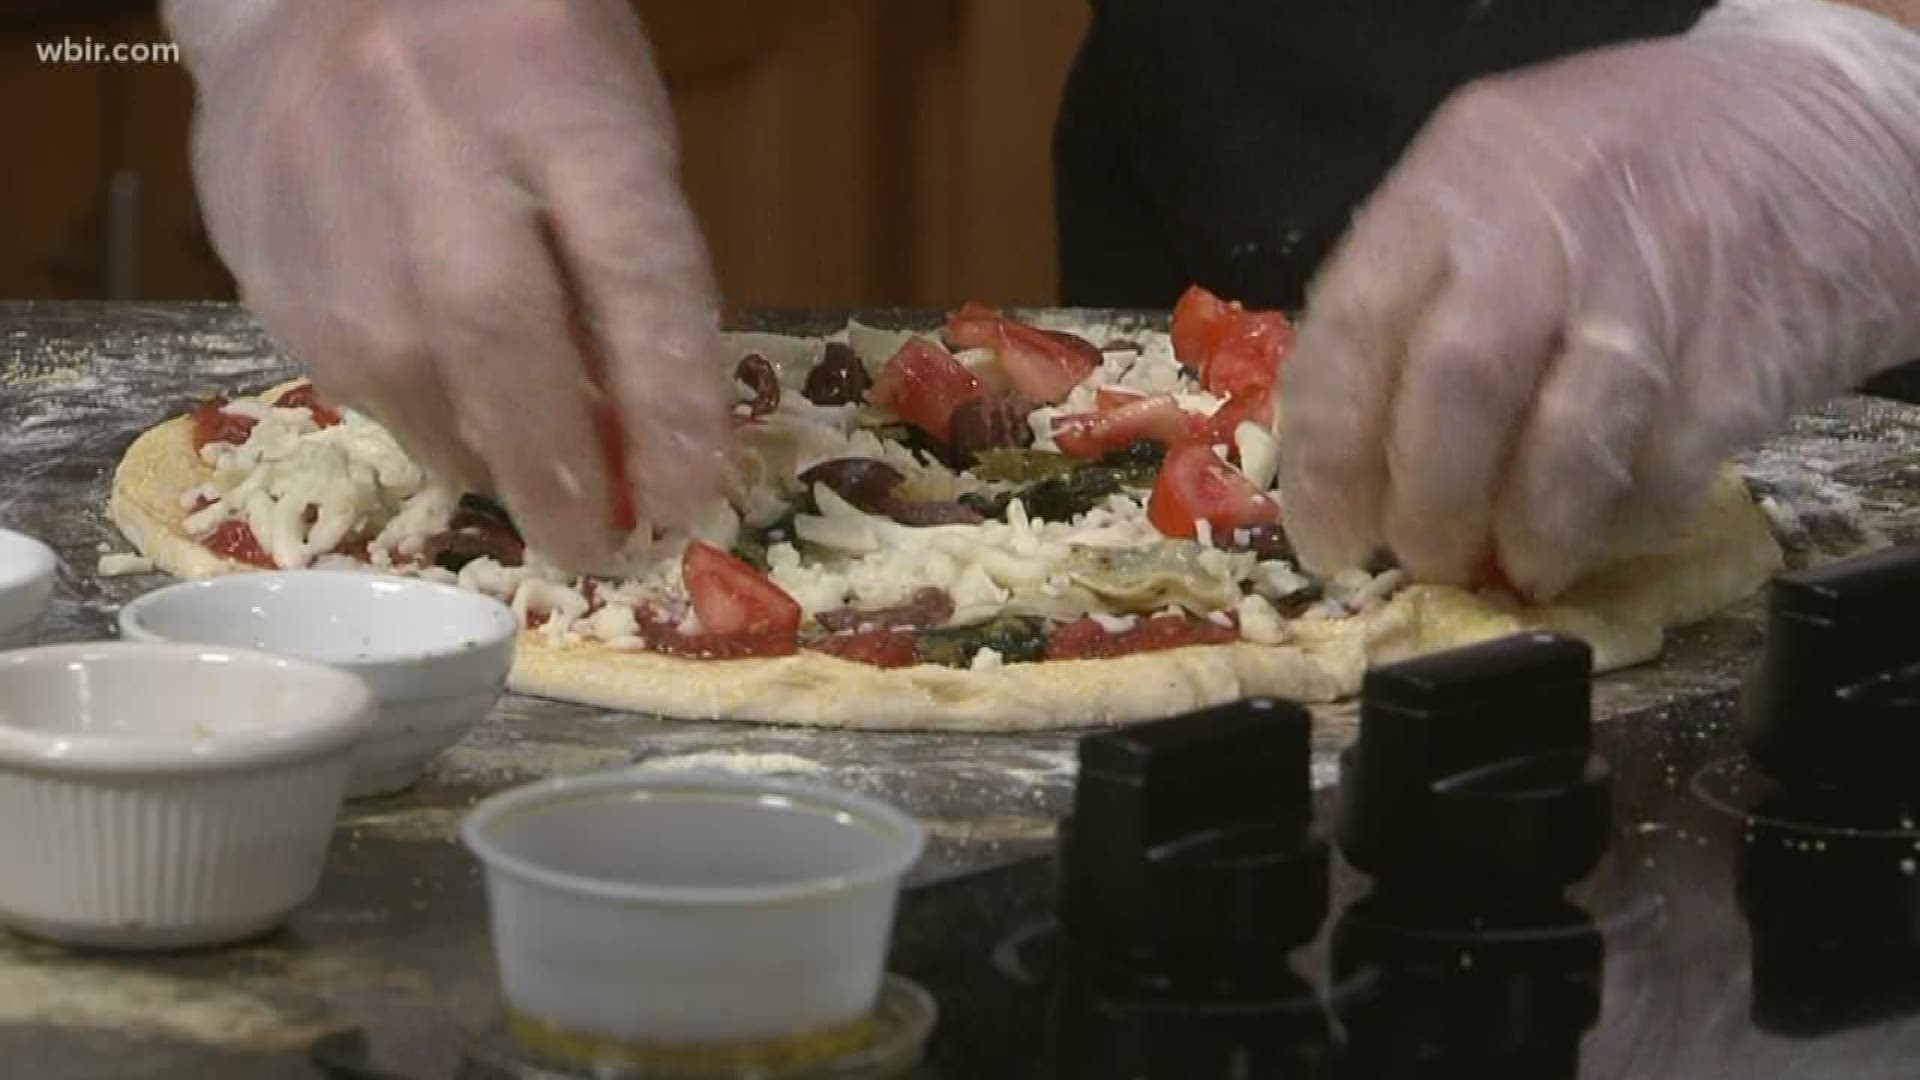 Jay Bernard shares a recipe for Popeye's Pizza which, of course, has spinach and Olive Oil. Metro Pizza is located in Alcoa, find them at .mmmetropizza.com. May 23, 2019-4pm.